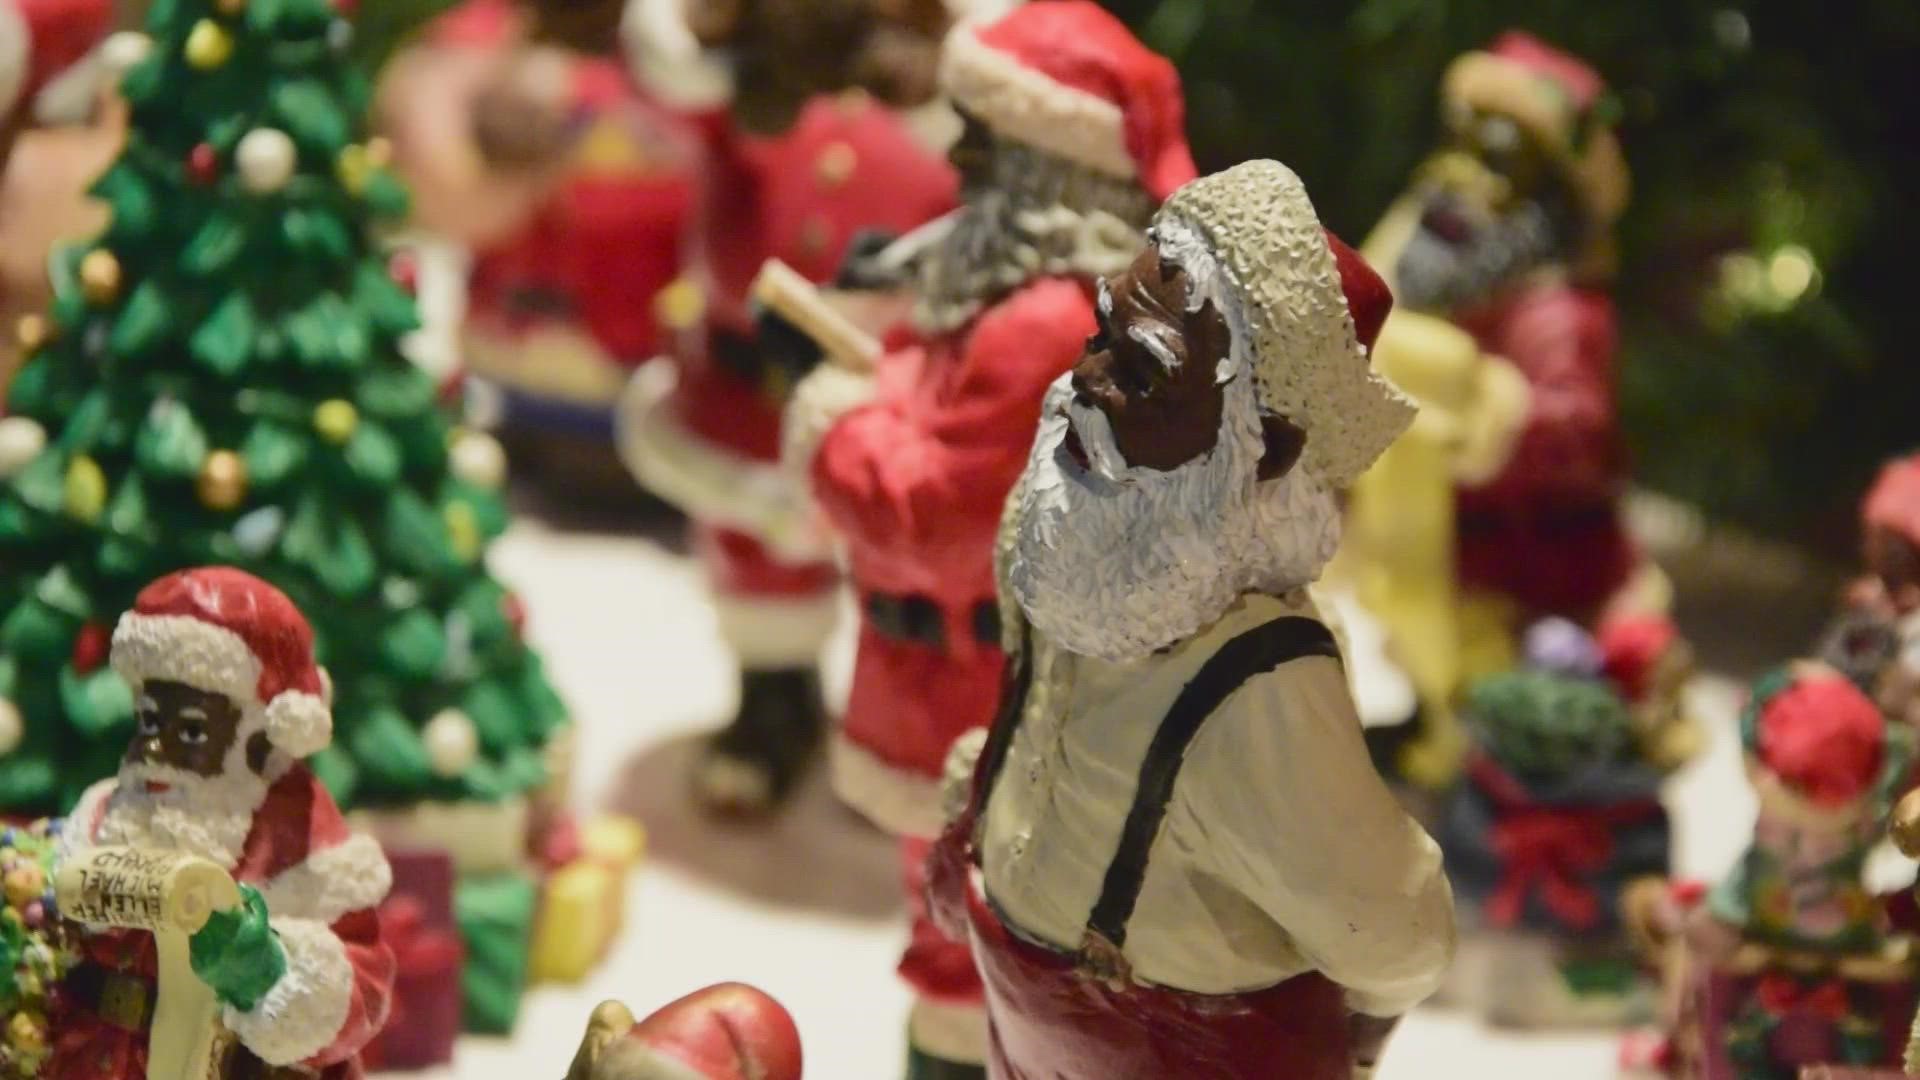 There are some incredible Santas in this collection, like a Hawaii Santa and a twerking Santa.